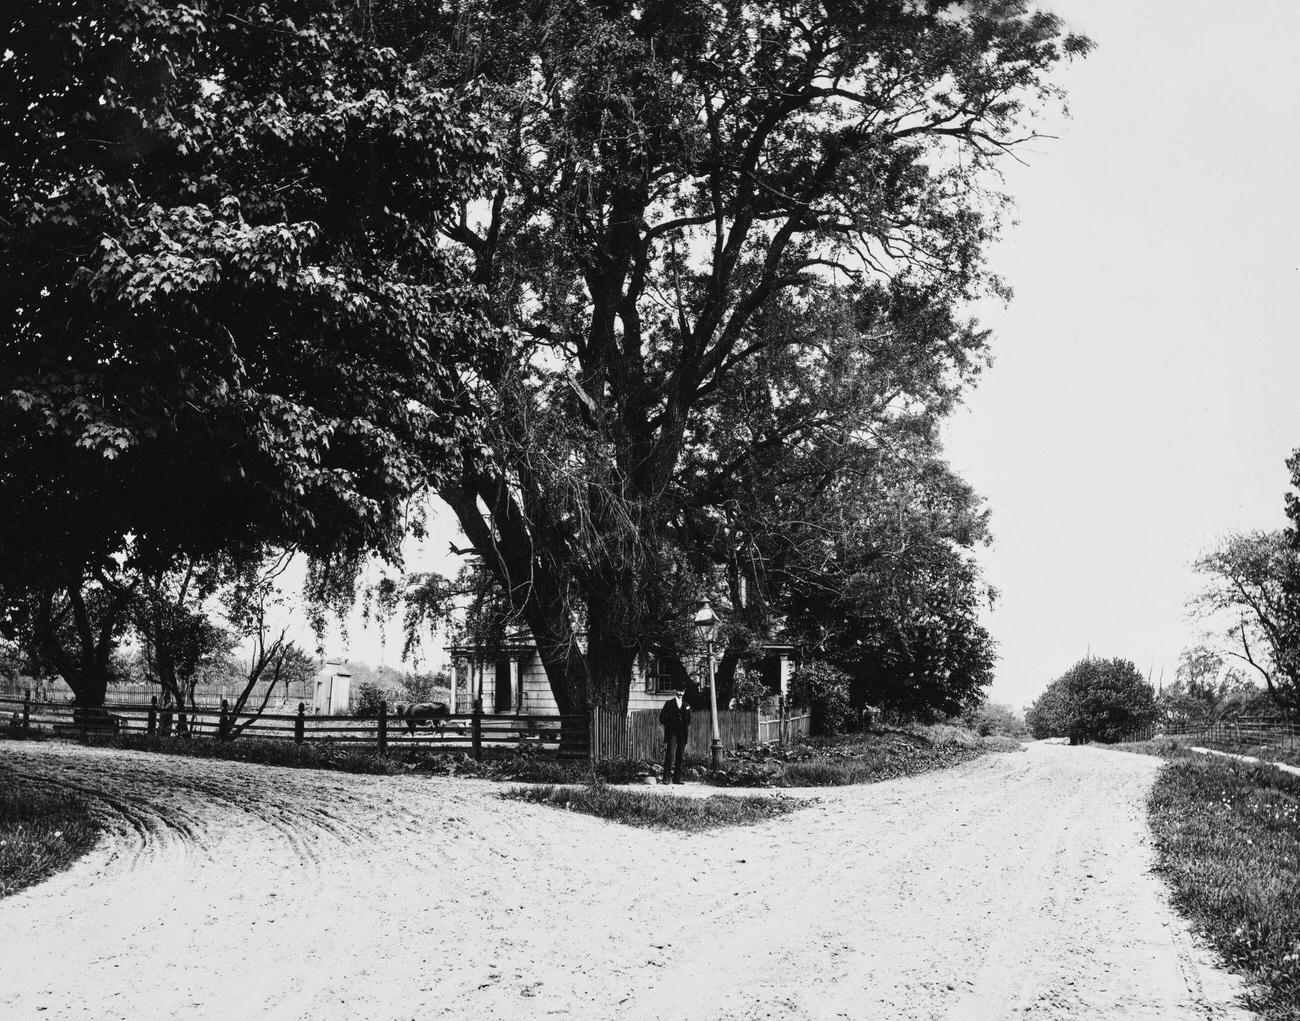 View Of The Intersection Of Two, Unidentified Dirt Roads On Which A Man Stands And Behind Him, A House Mostly Hidden By Trees, 1892.